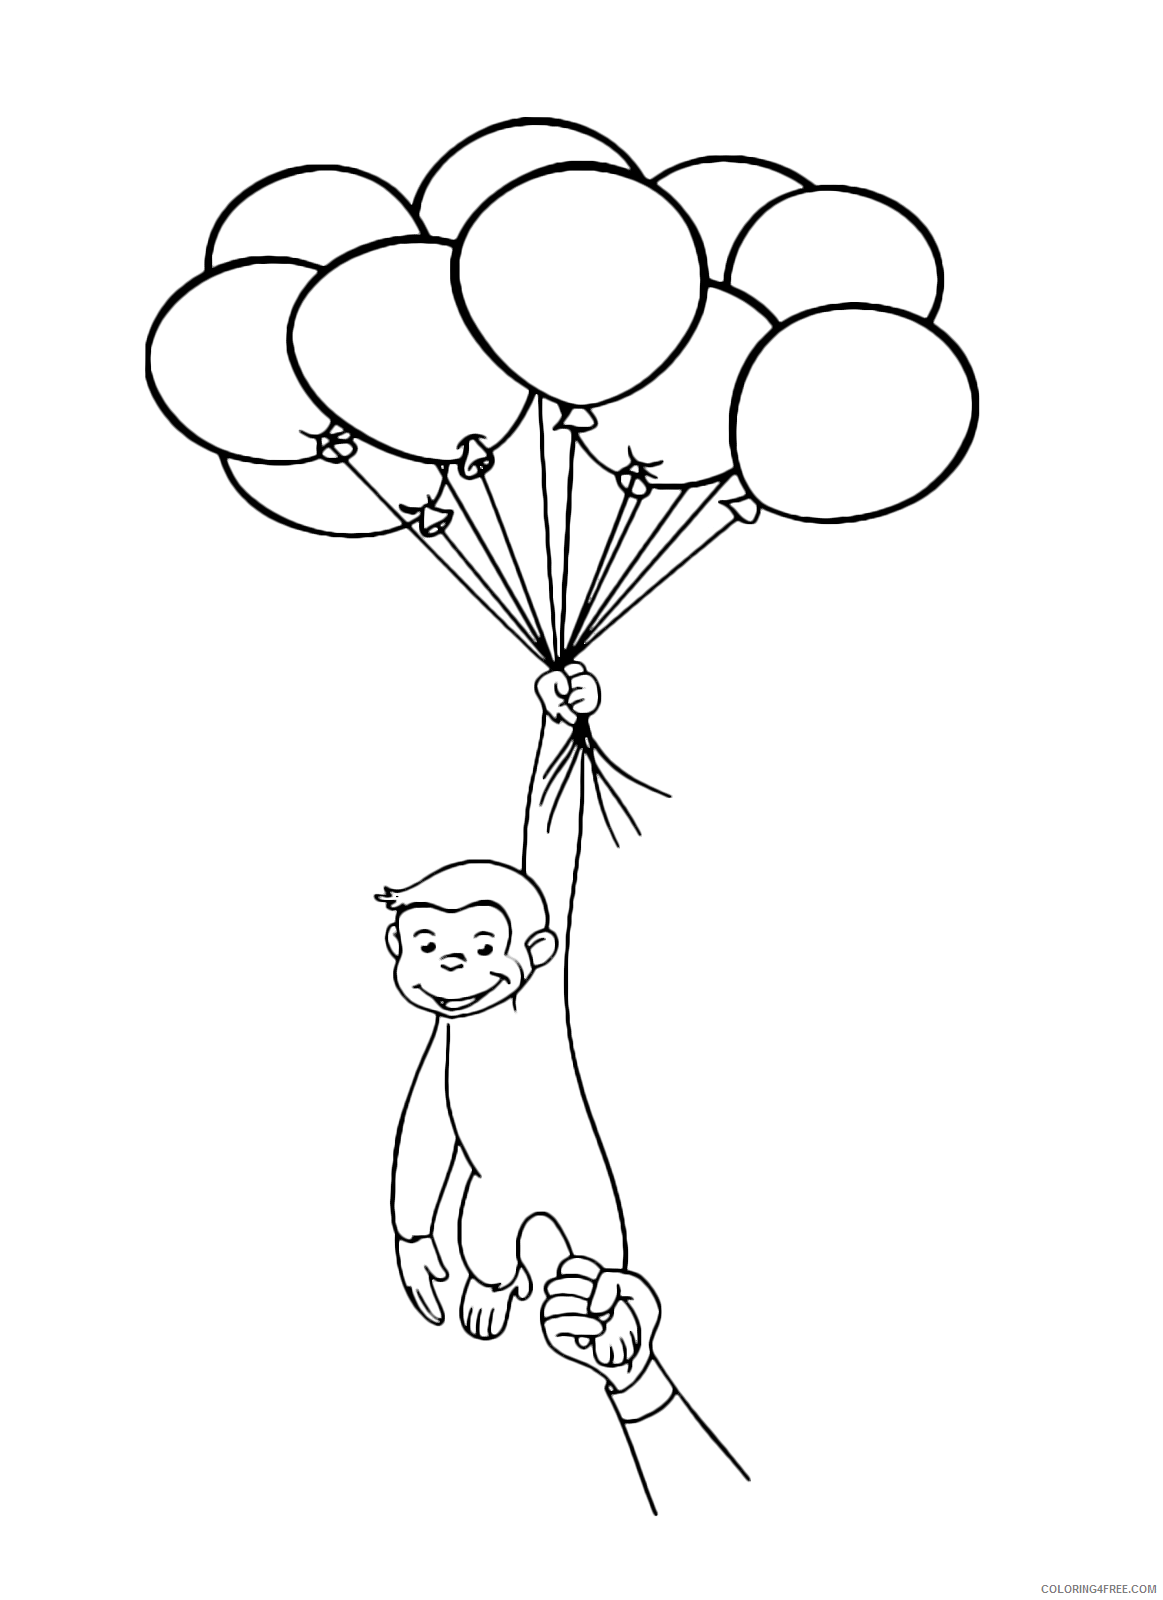 Curious George Coloring Pages Cartoons Curious George Balloon Printable 2020 1903 Coloring4free